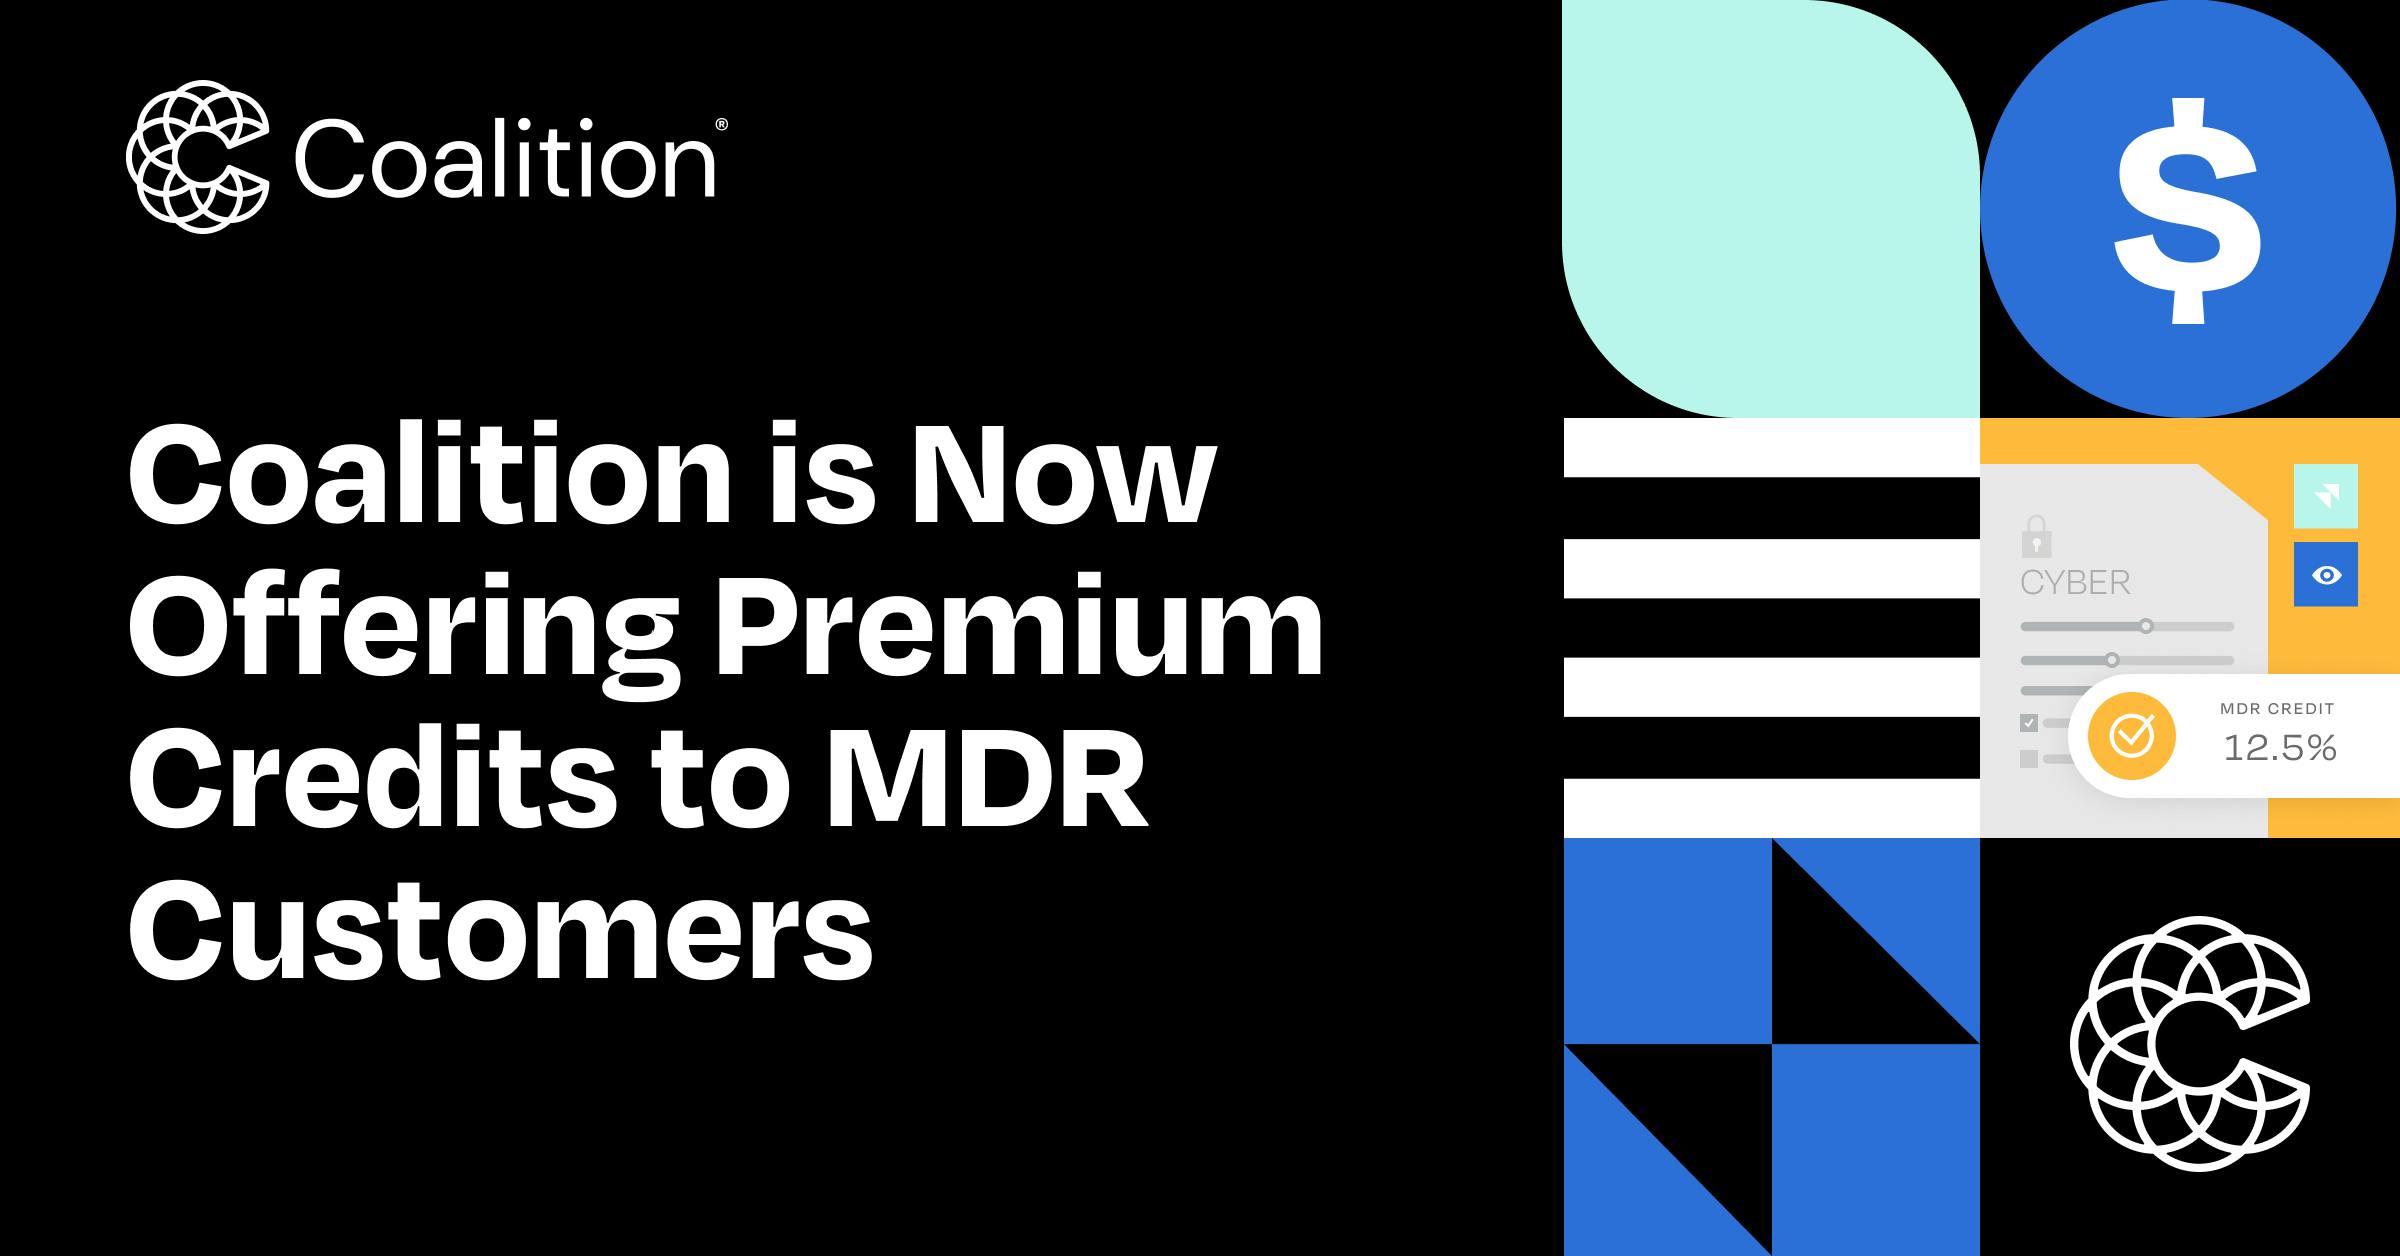 Coalition is Now Offering Premium Credits to MDR Customers